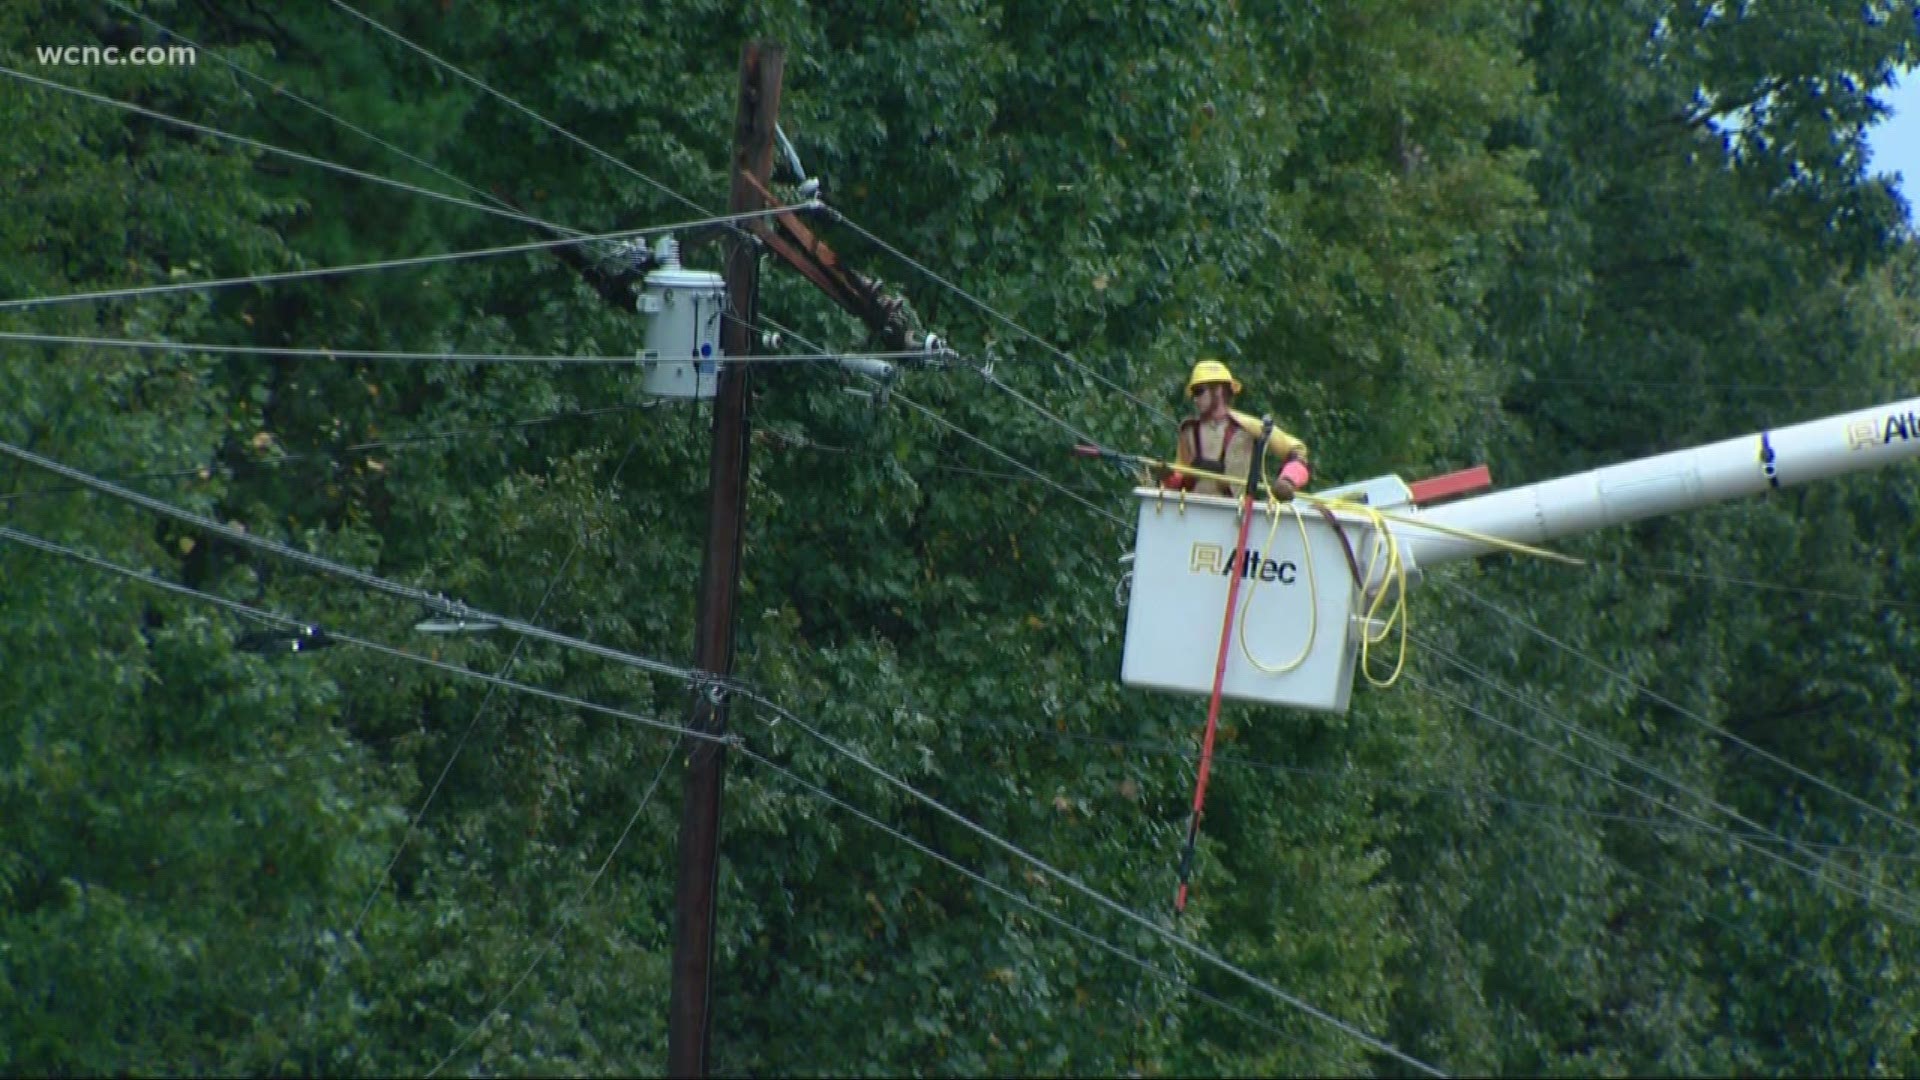 Crews are working through the night to restore power to homes as quickly as possible.